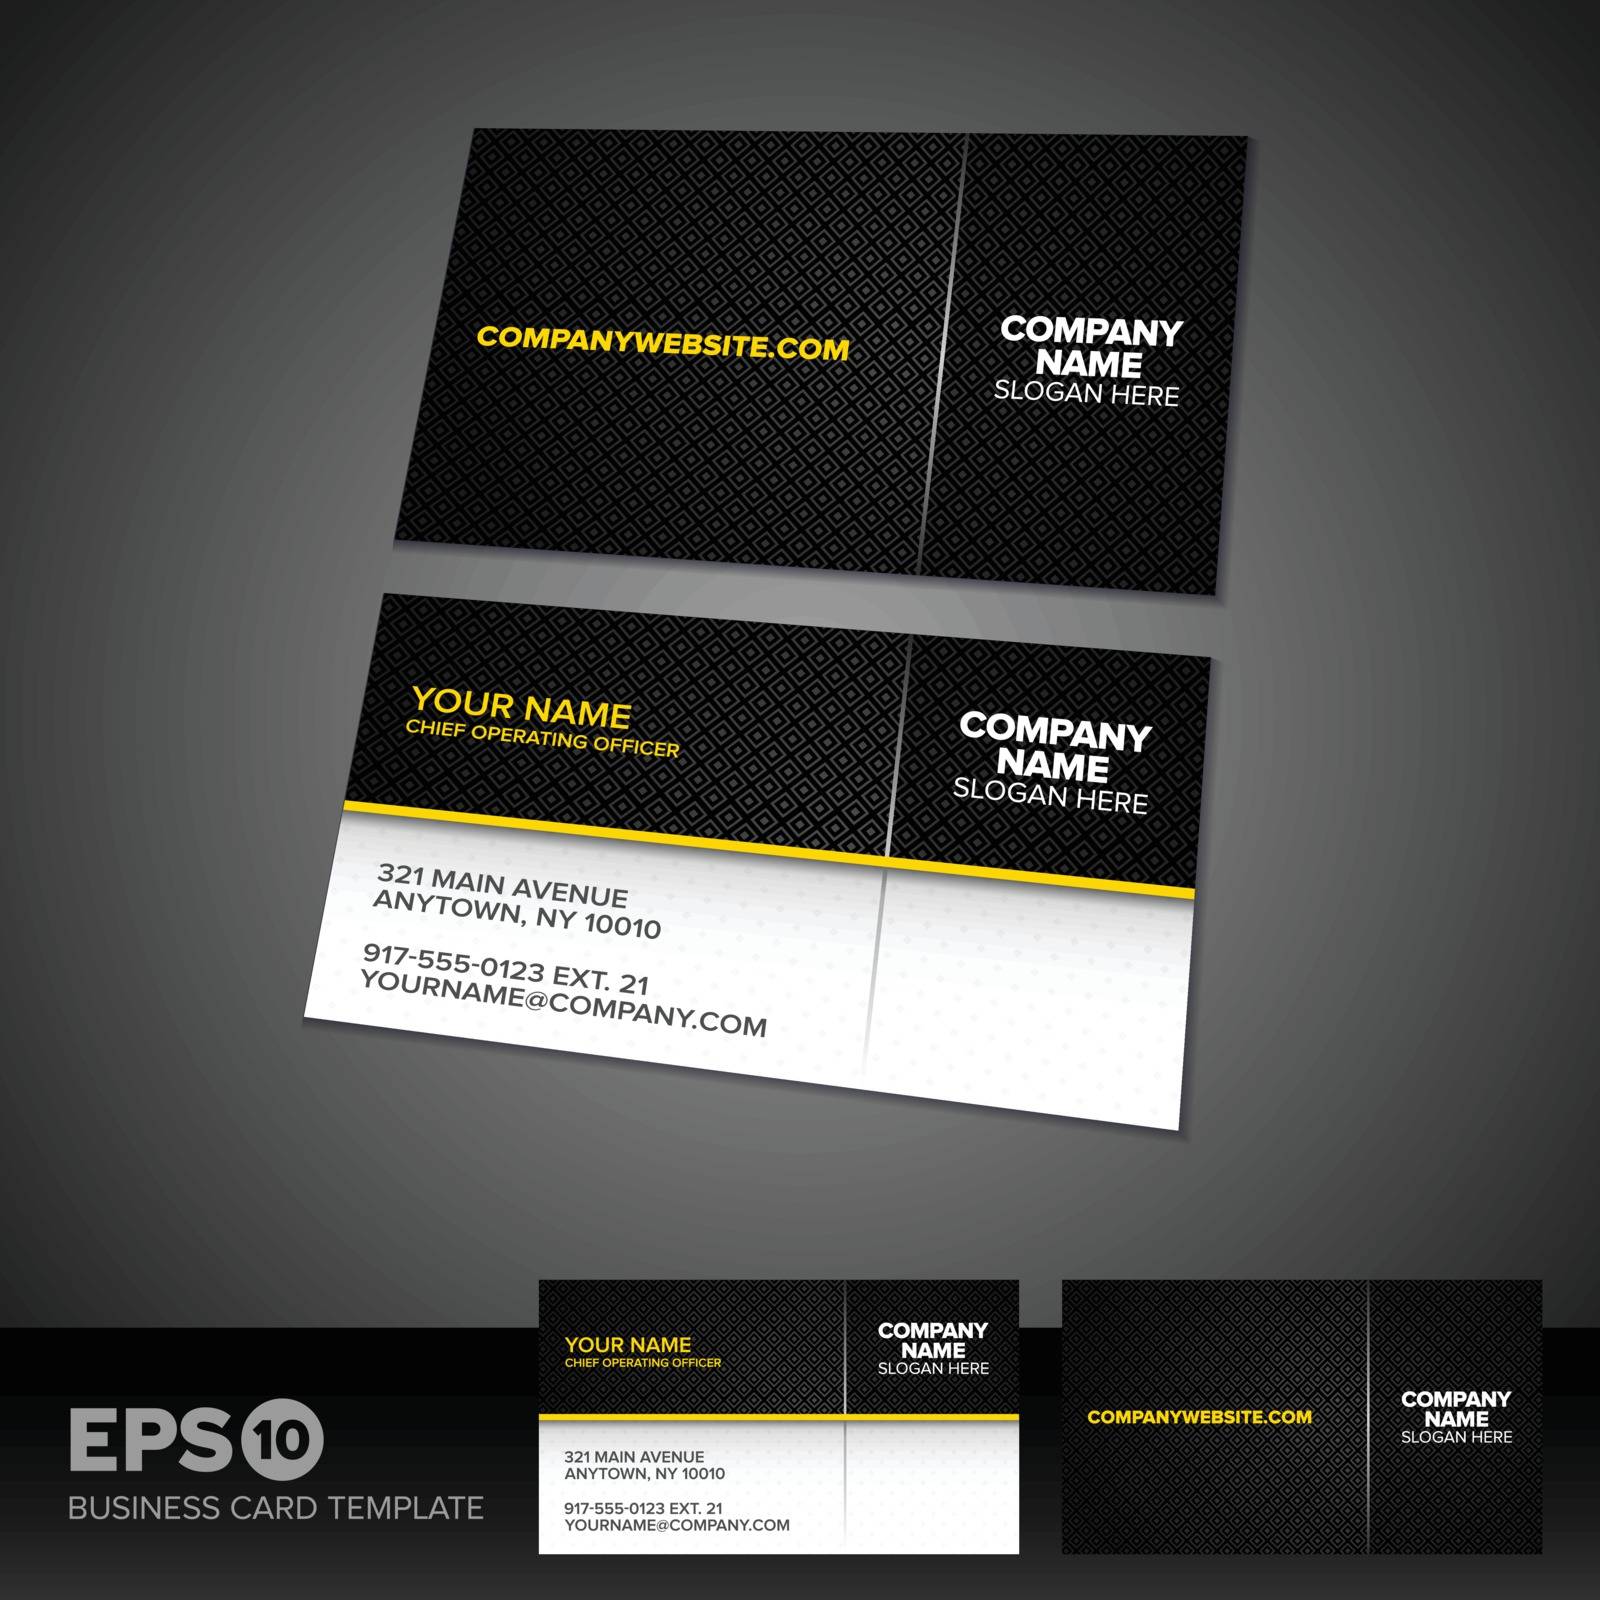 Vector illustration with a business card template.